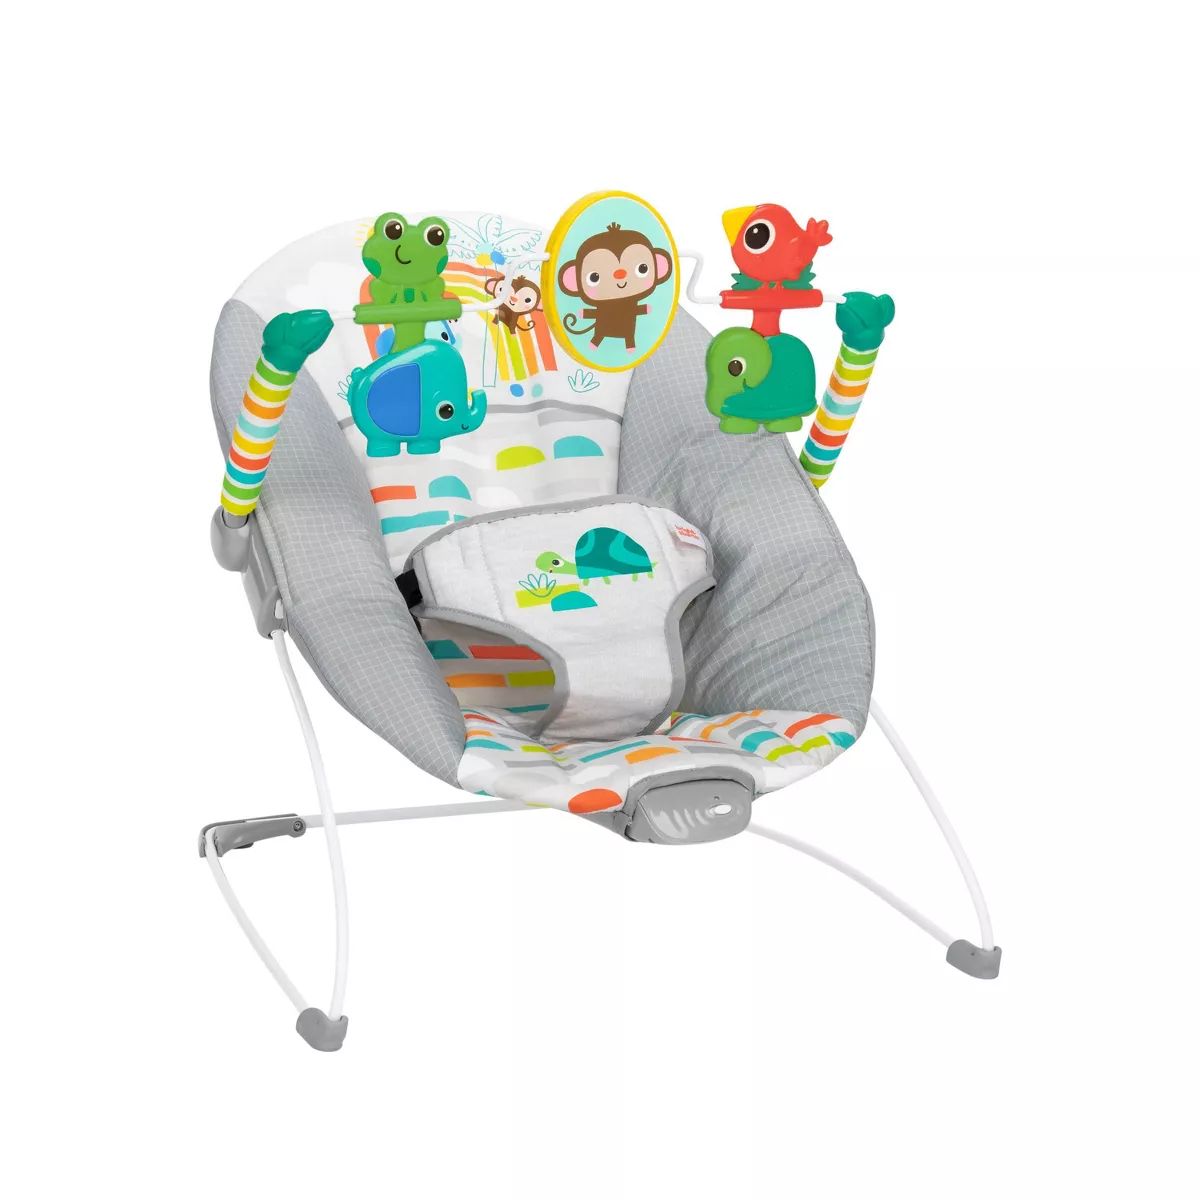 Bright Starts Playful Paradise Vibrating Baby Bouncer with Toys | Target